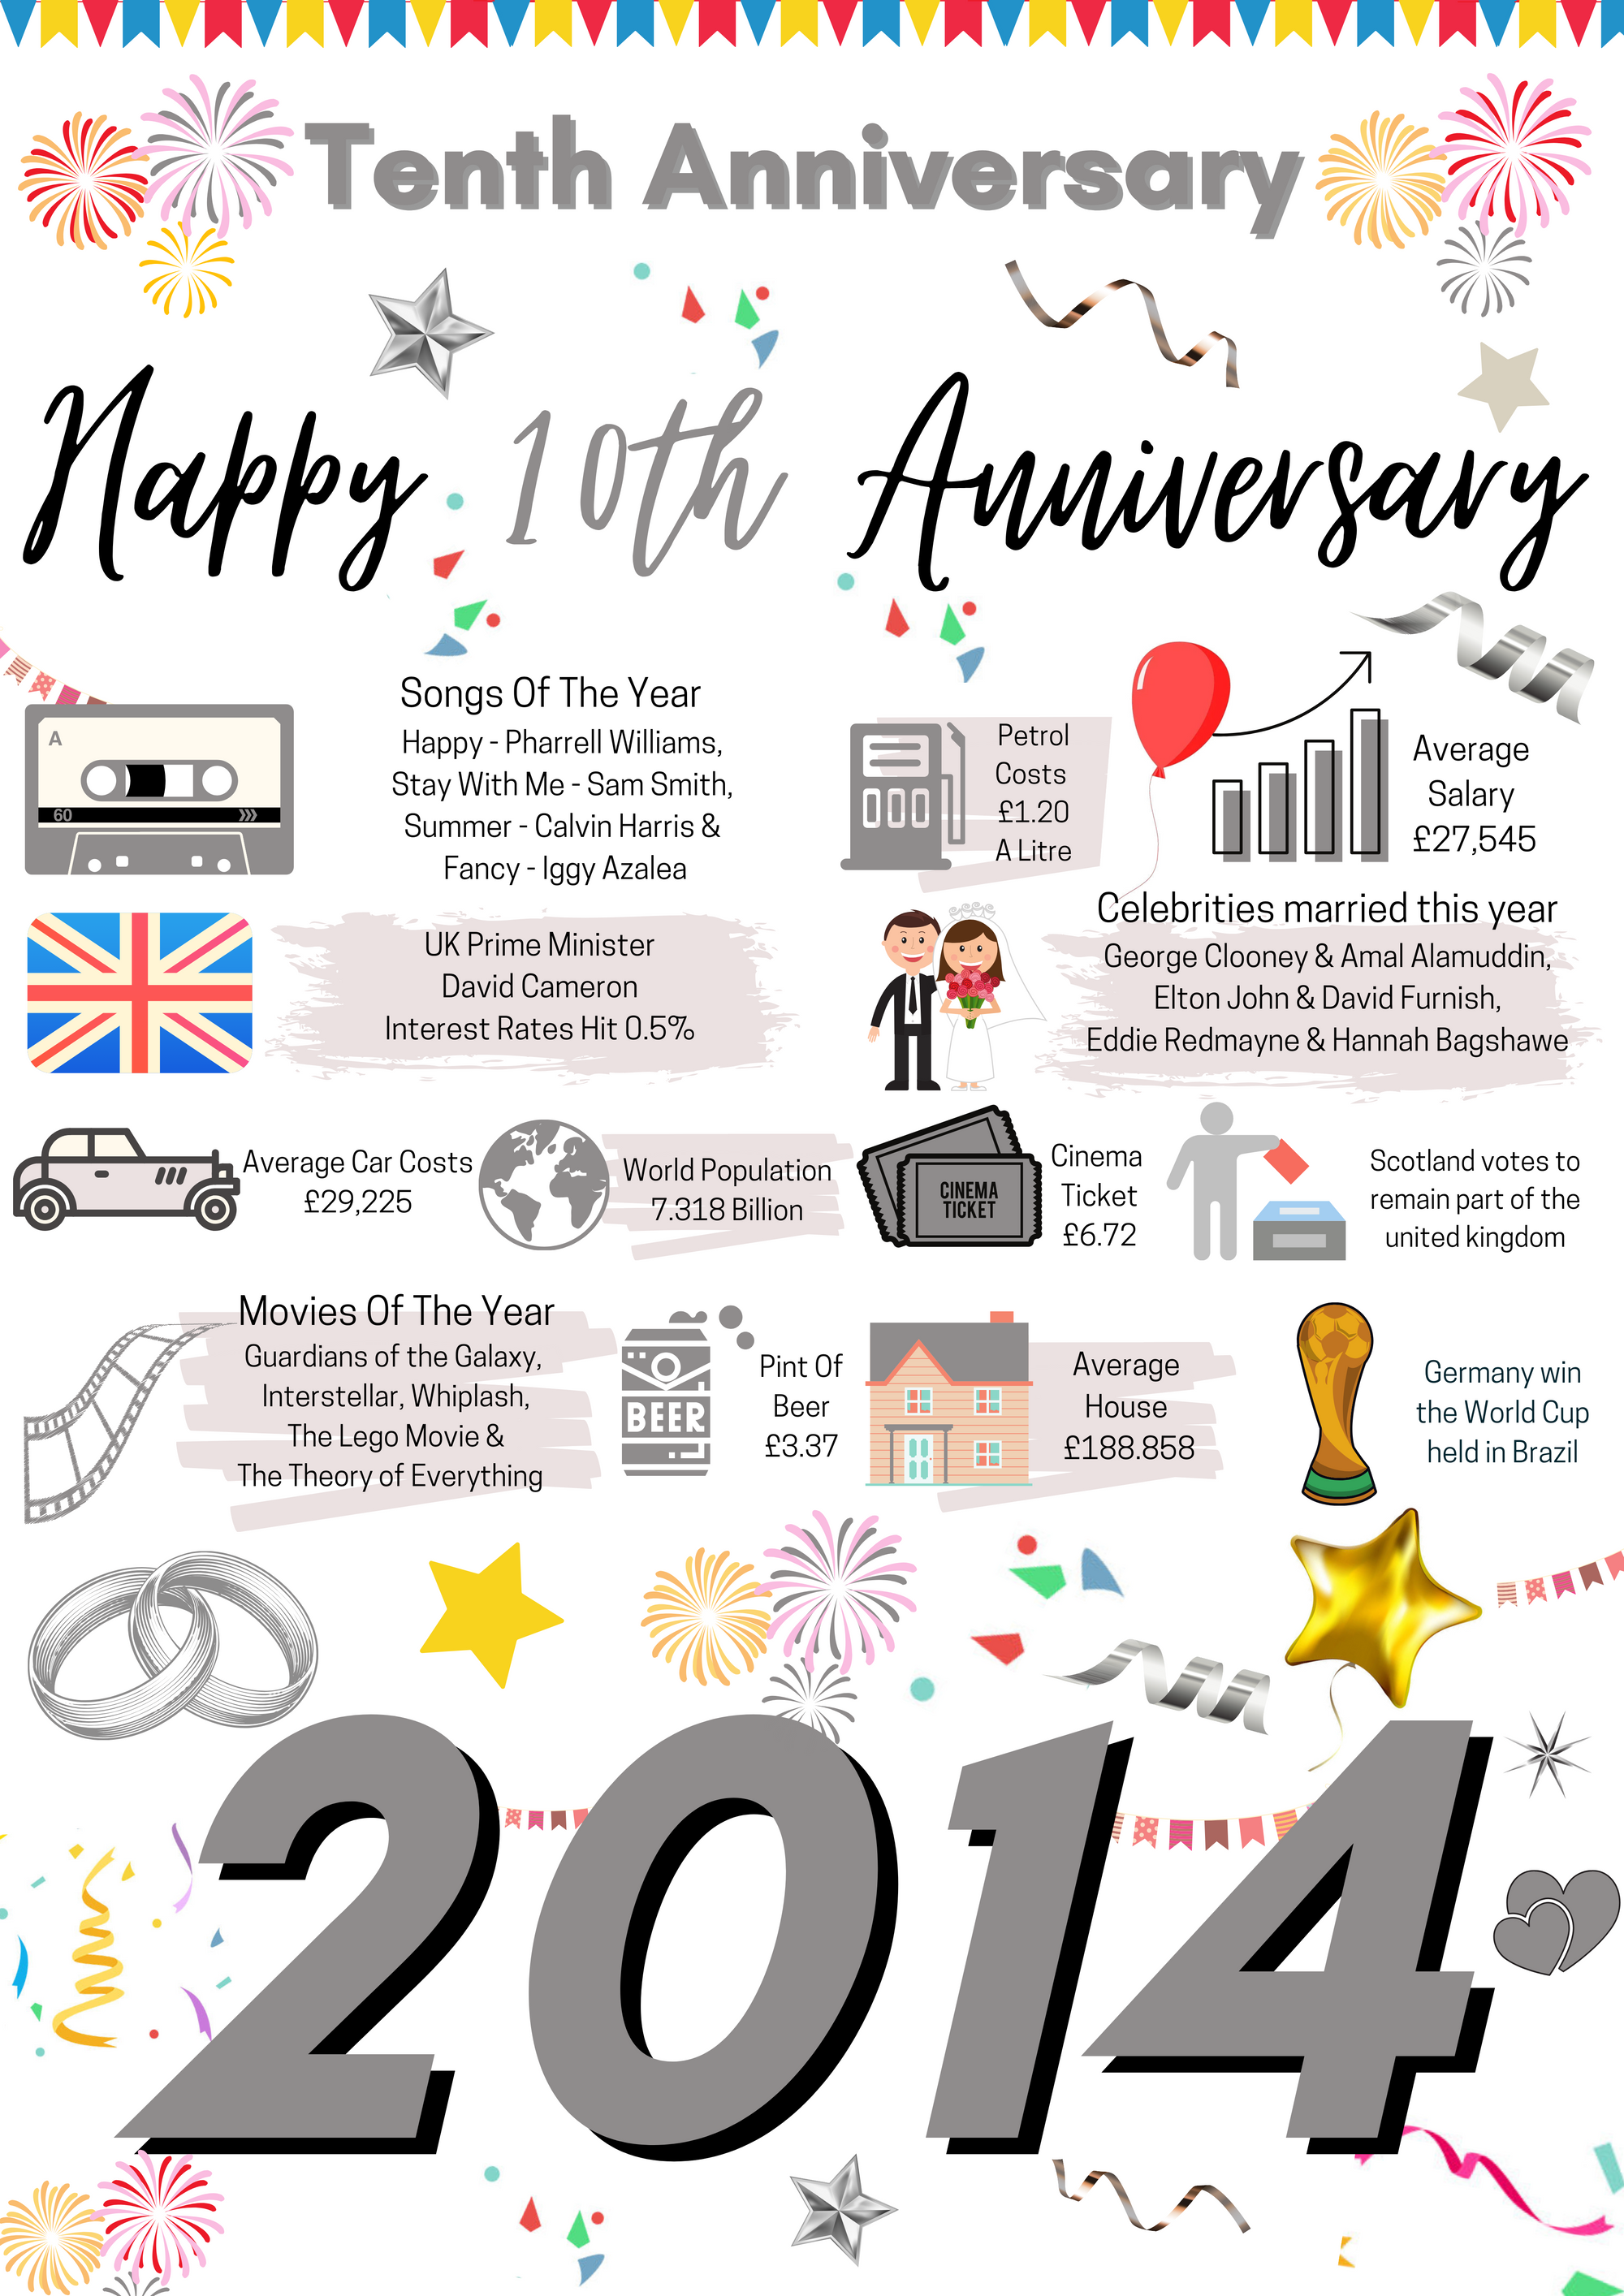 10th WEDDING Anniversary Present, 10 Tin WEDDING Poster, 2014 Year of Marriage Facts